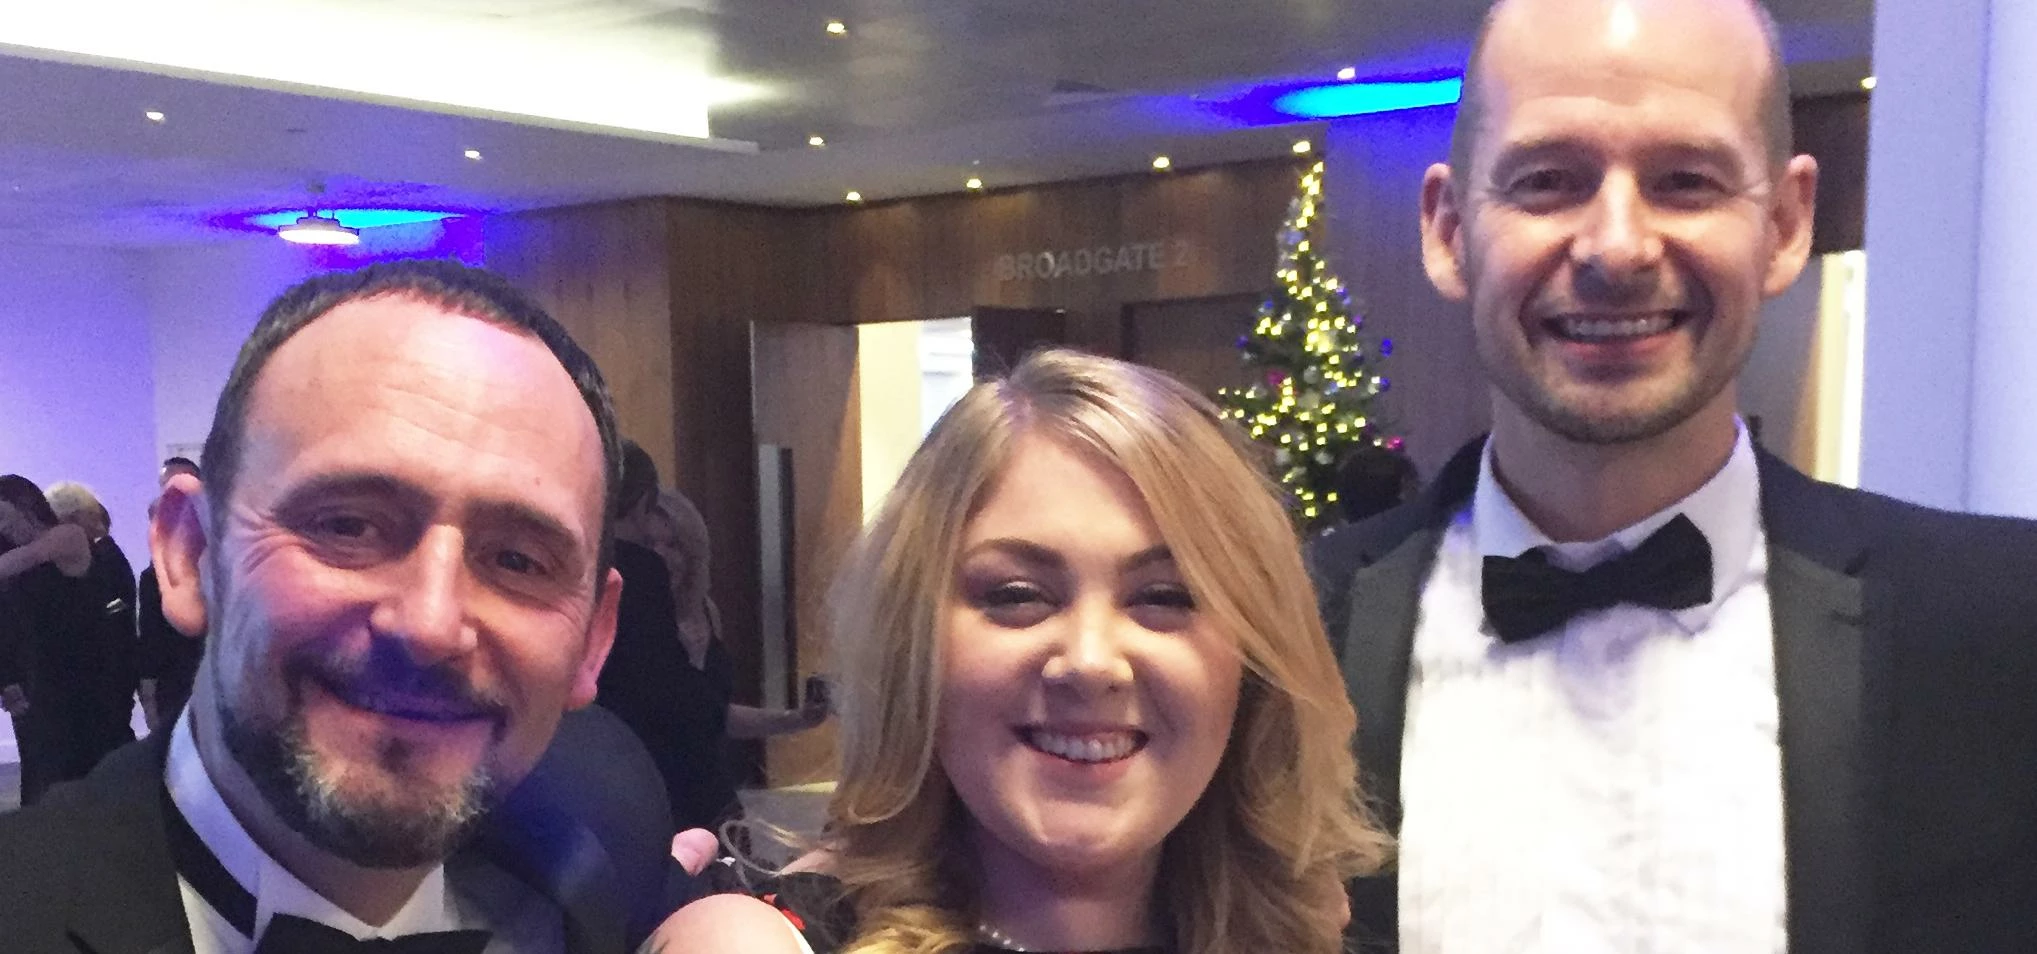 Acorn Stairlifts staff at the 2016 BHTA Awards, from the left, Ian Holmes, Jodie McAlister and Nick 